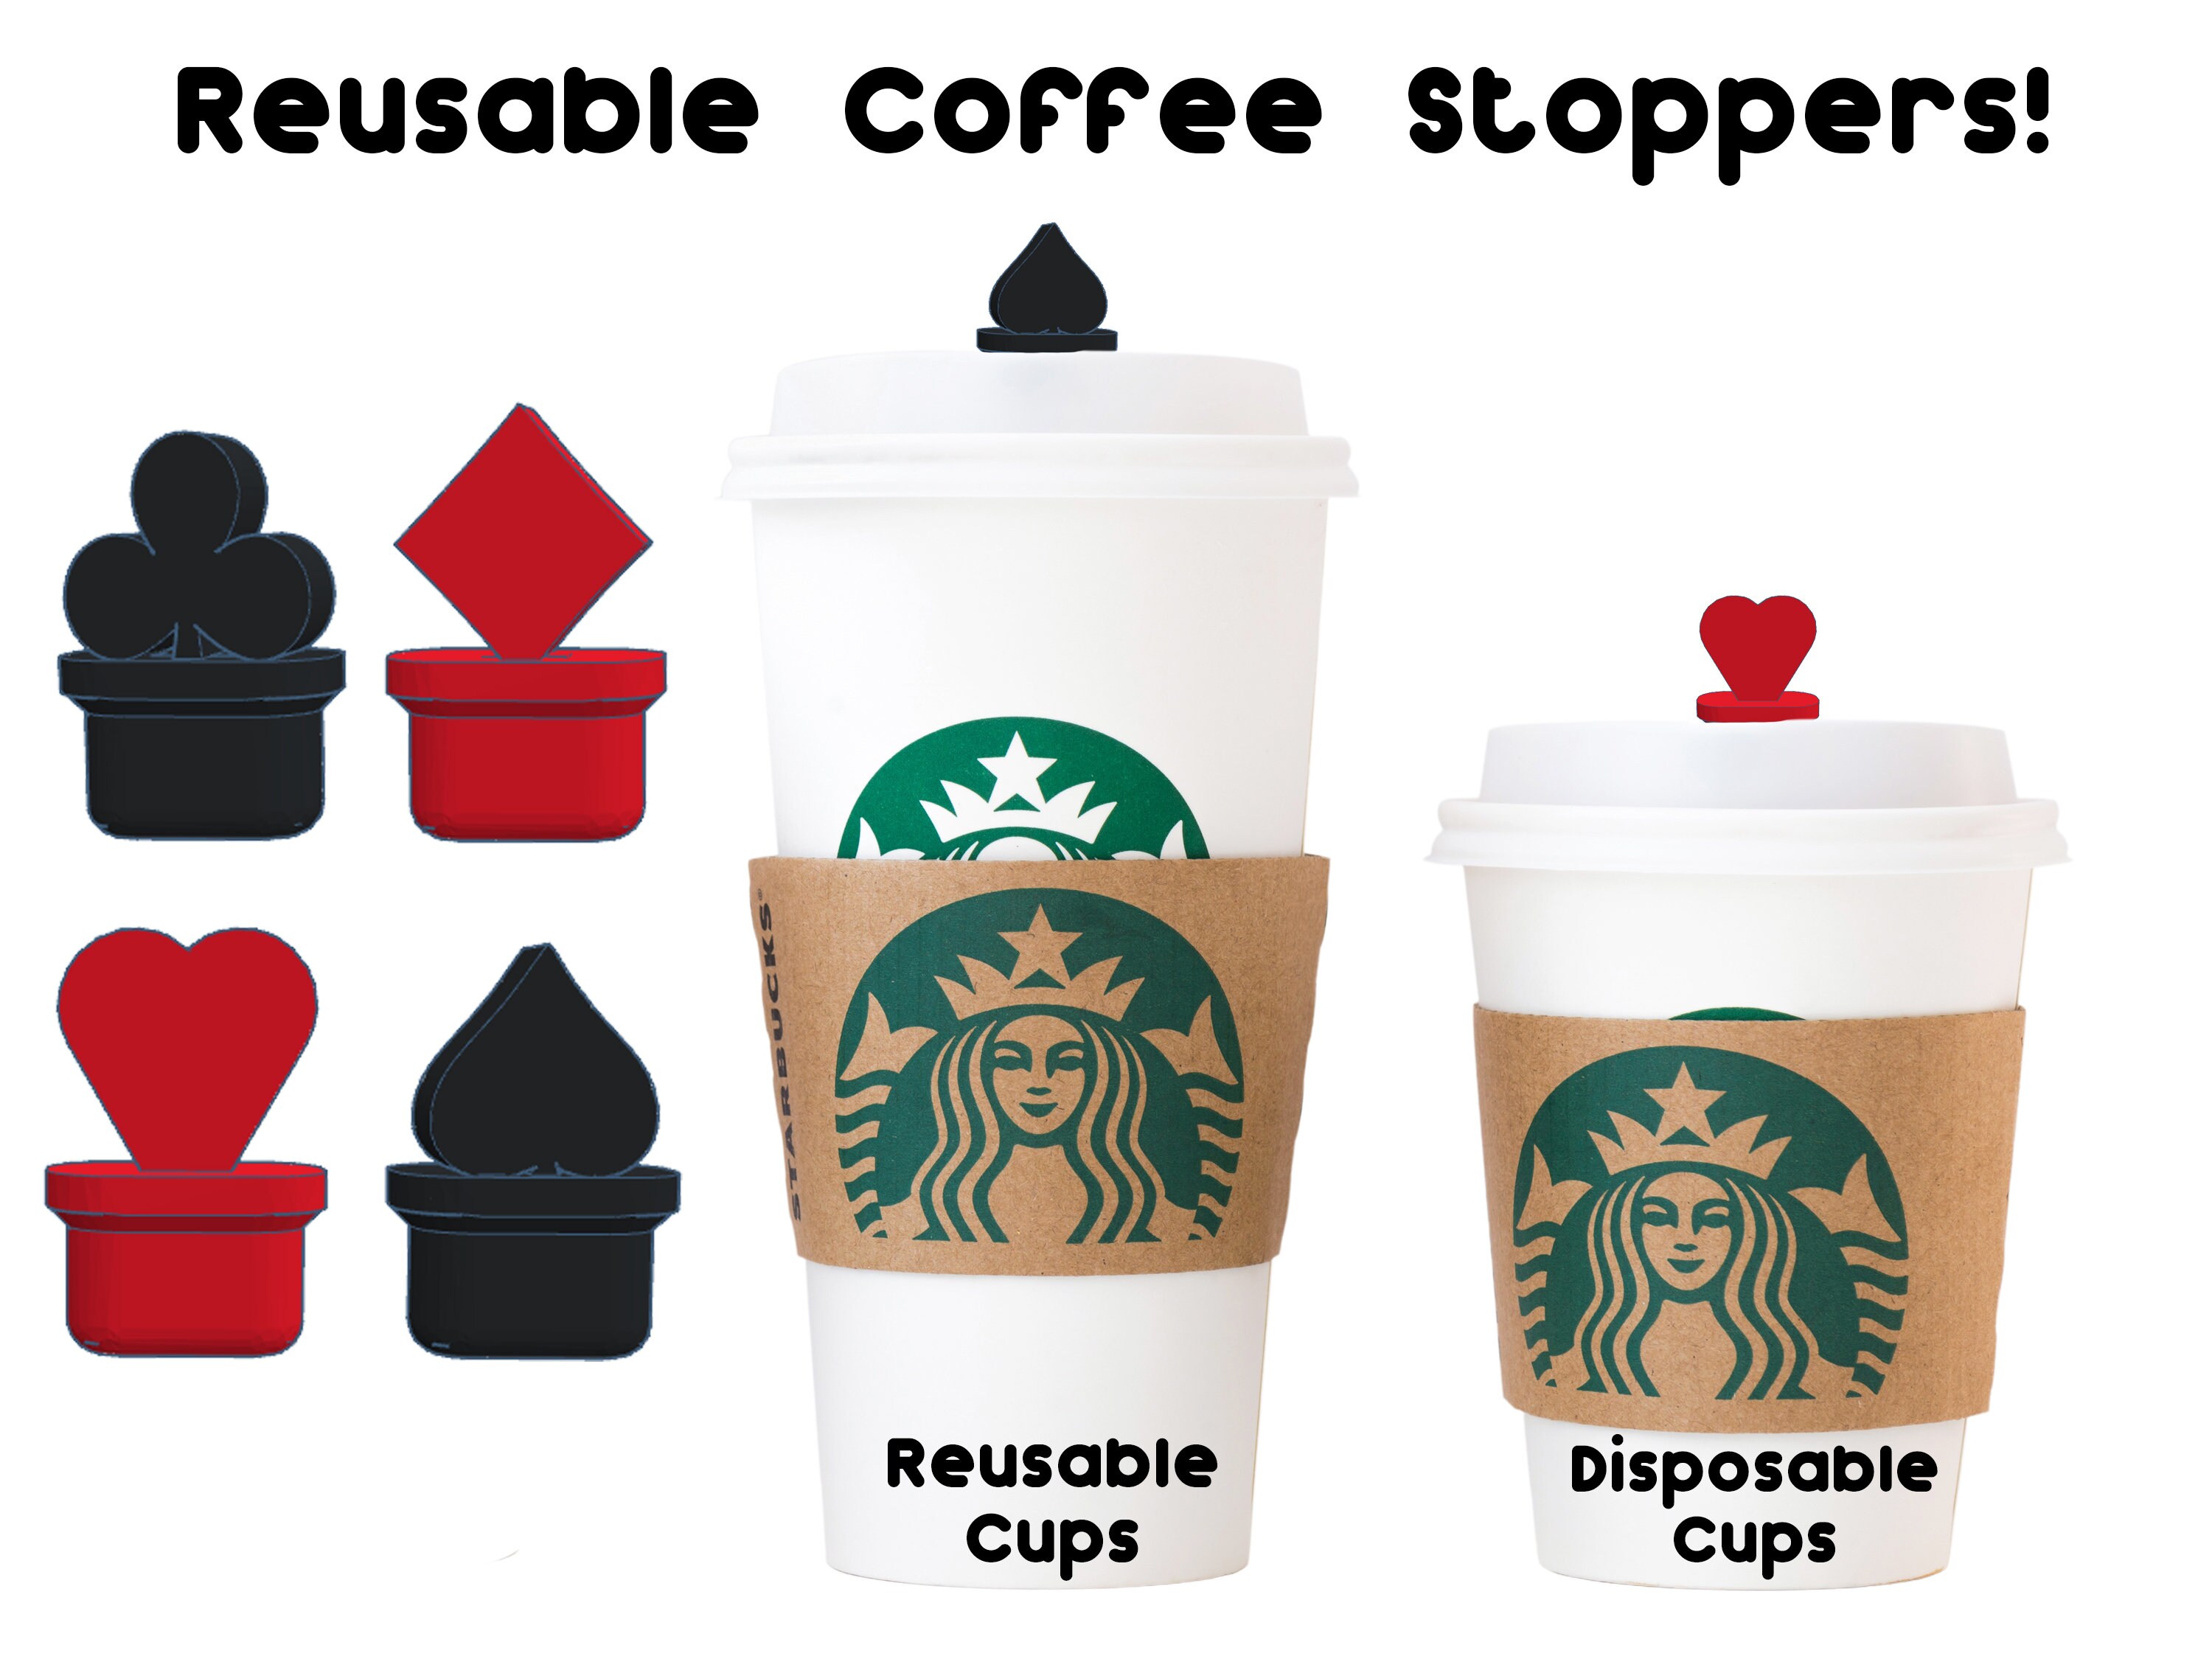 Starbucks Reusable Hot Cups 6 Pack, Reusable Coffee Cup W